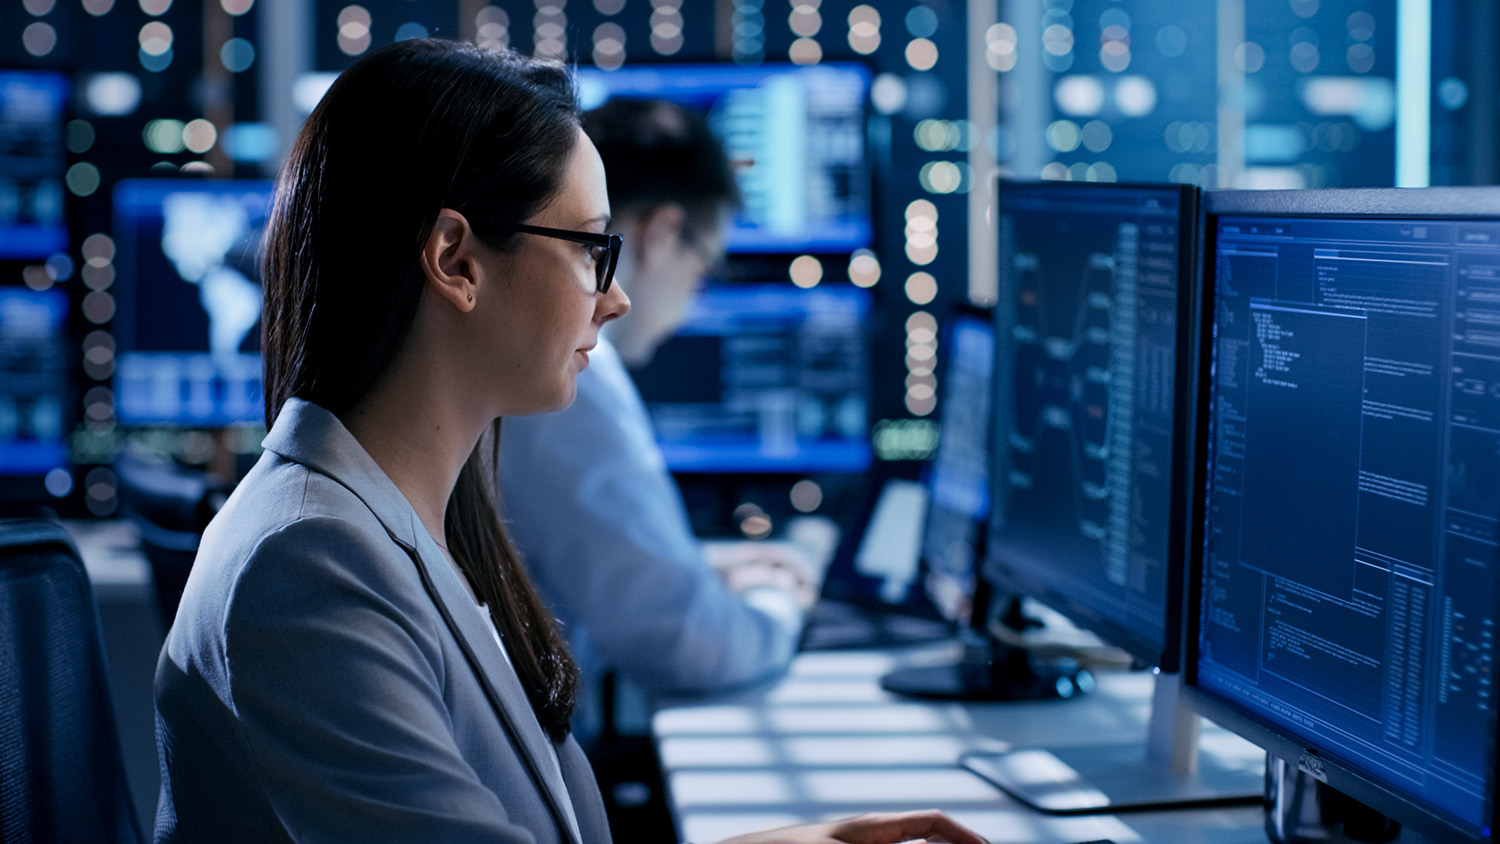 The U.S. Bureau of Labor Statistics projects a 31% growth rate for information security analysts from 2019-29, far exceeding the national average for all occupations.